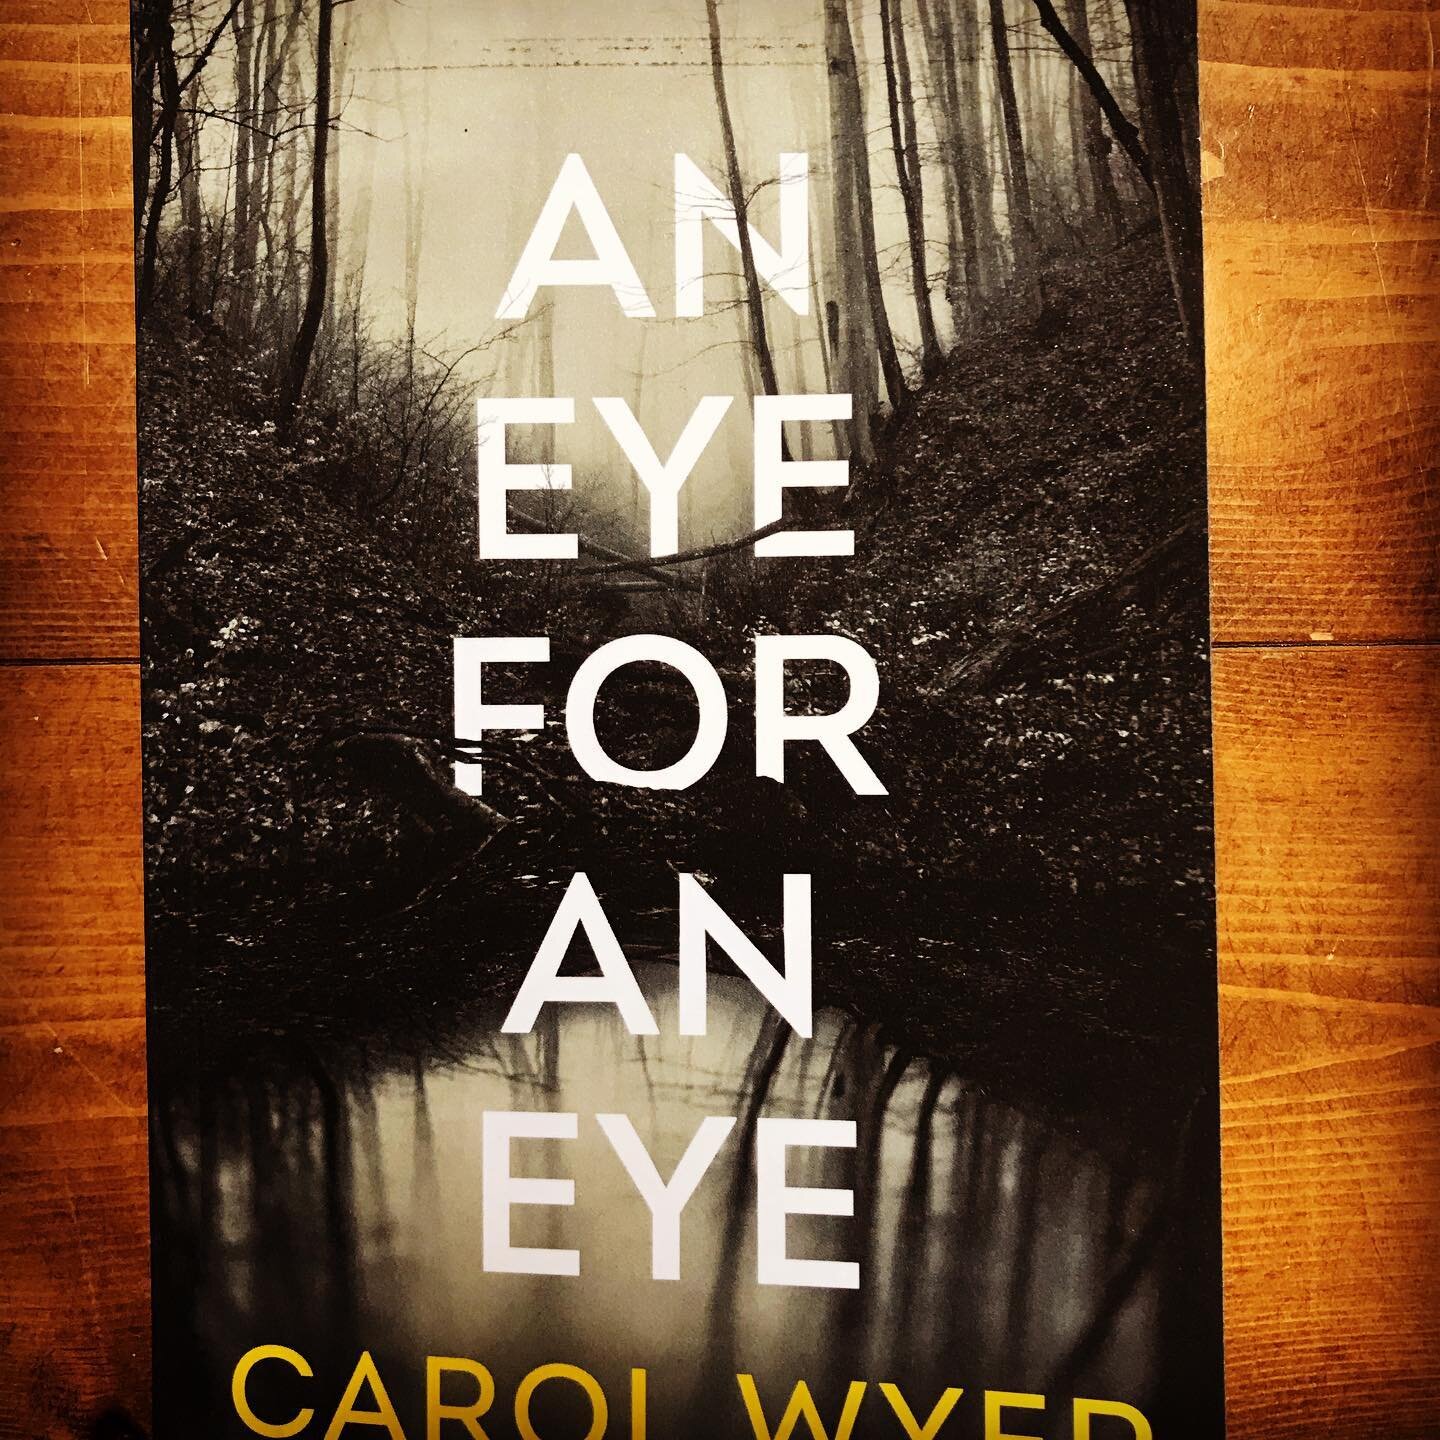 So this is the very first book I&rsquo;ve ever bought purely on the review of a #bookreviewer on social media. And I&rsquo;ve never read @carolwyer  before either. I know, I&rsquo;m a dinosaur! 🦕 The enthusiasm of the #reviewer (plus the story) real